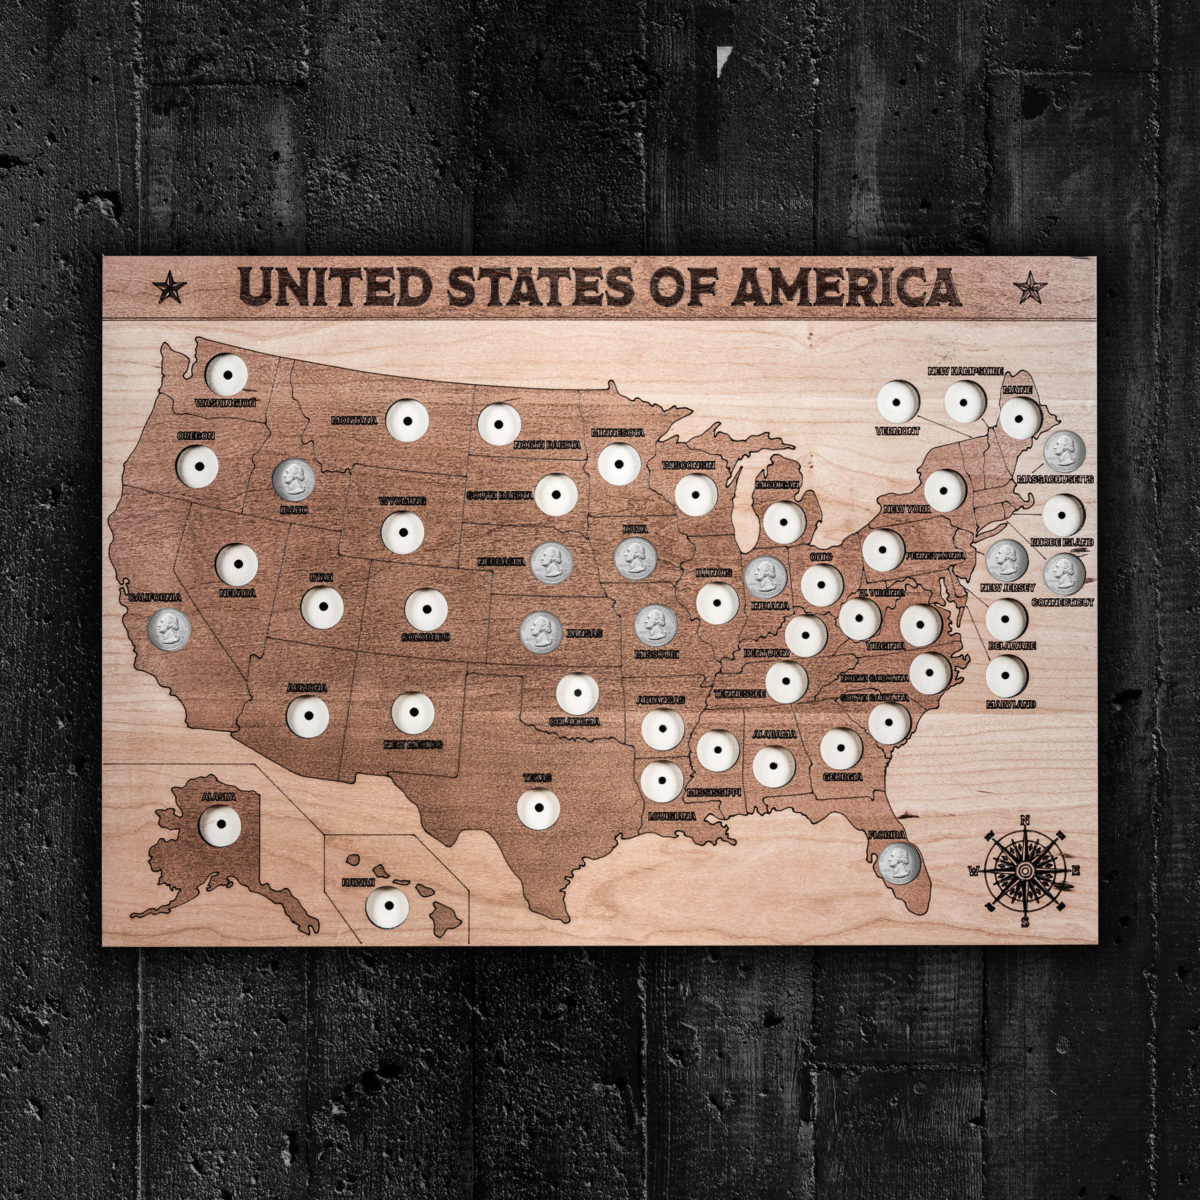 50 State Wooden Quarter Map – US Coin Map in Wood for US Quarter